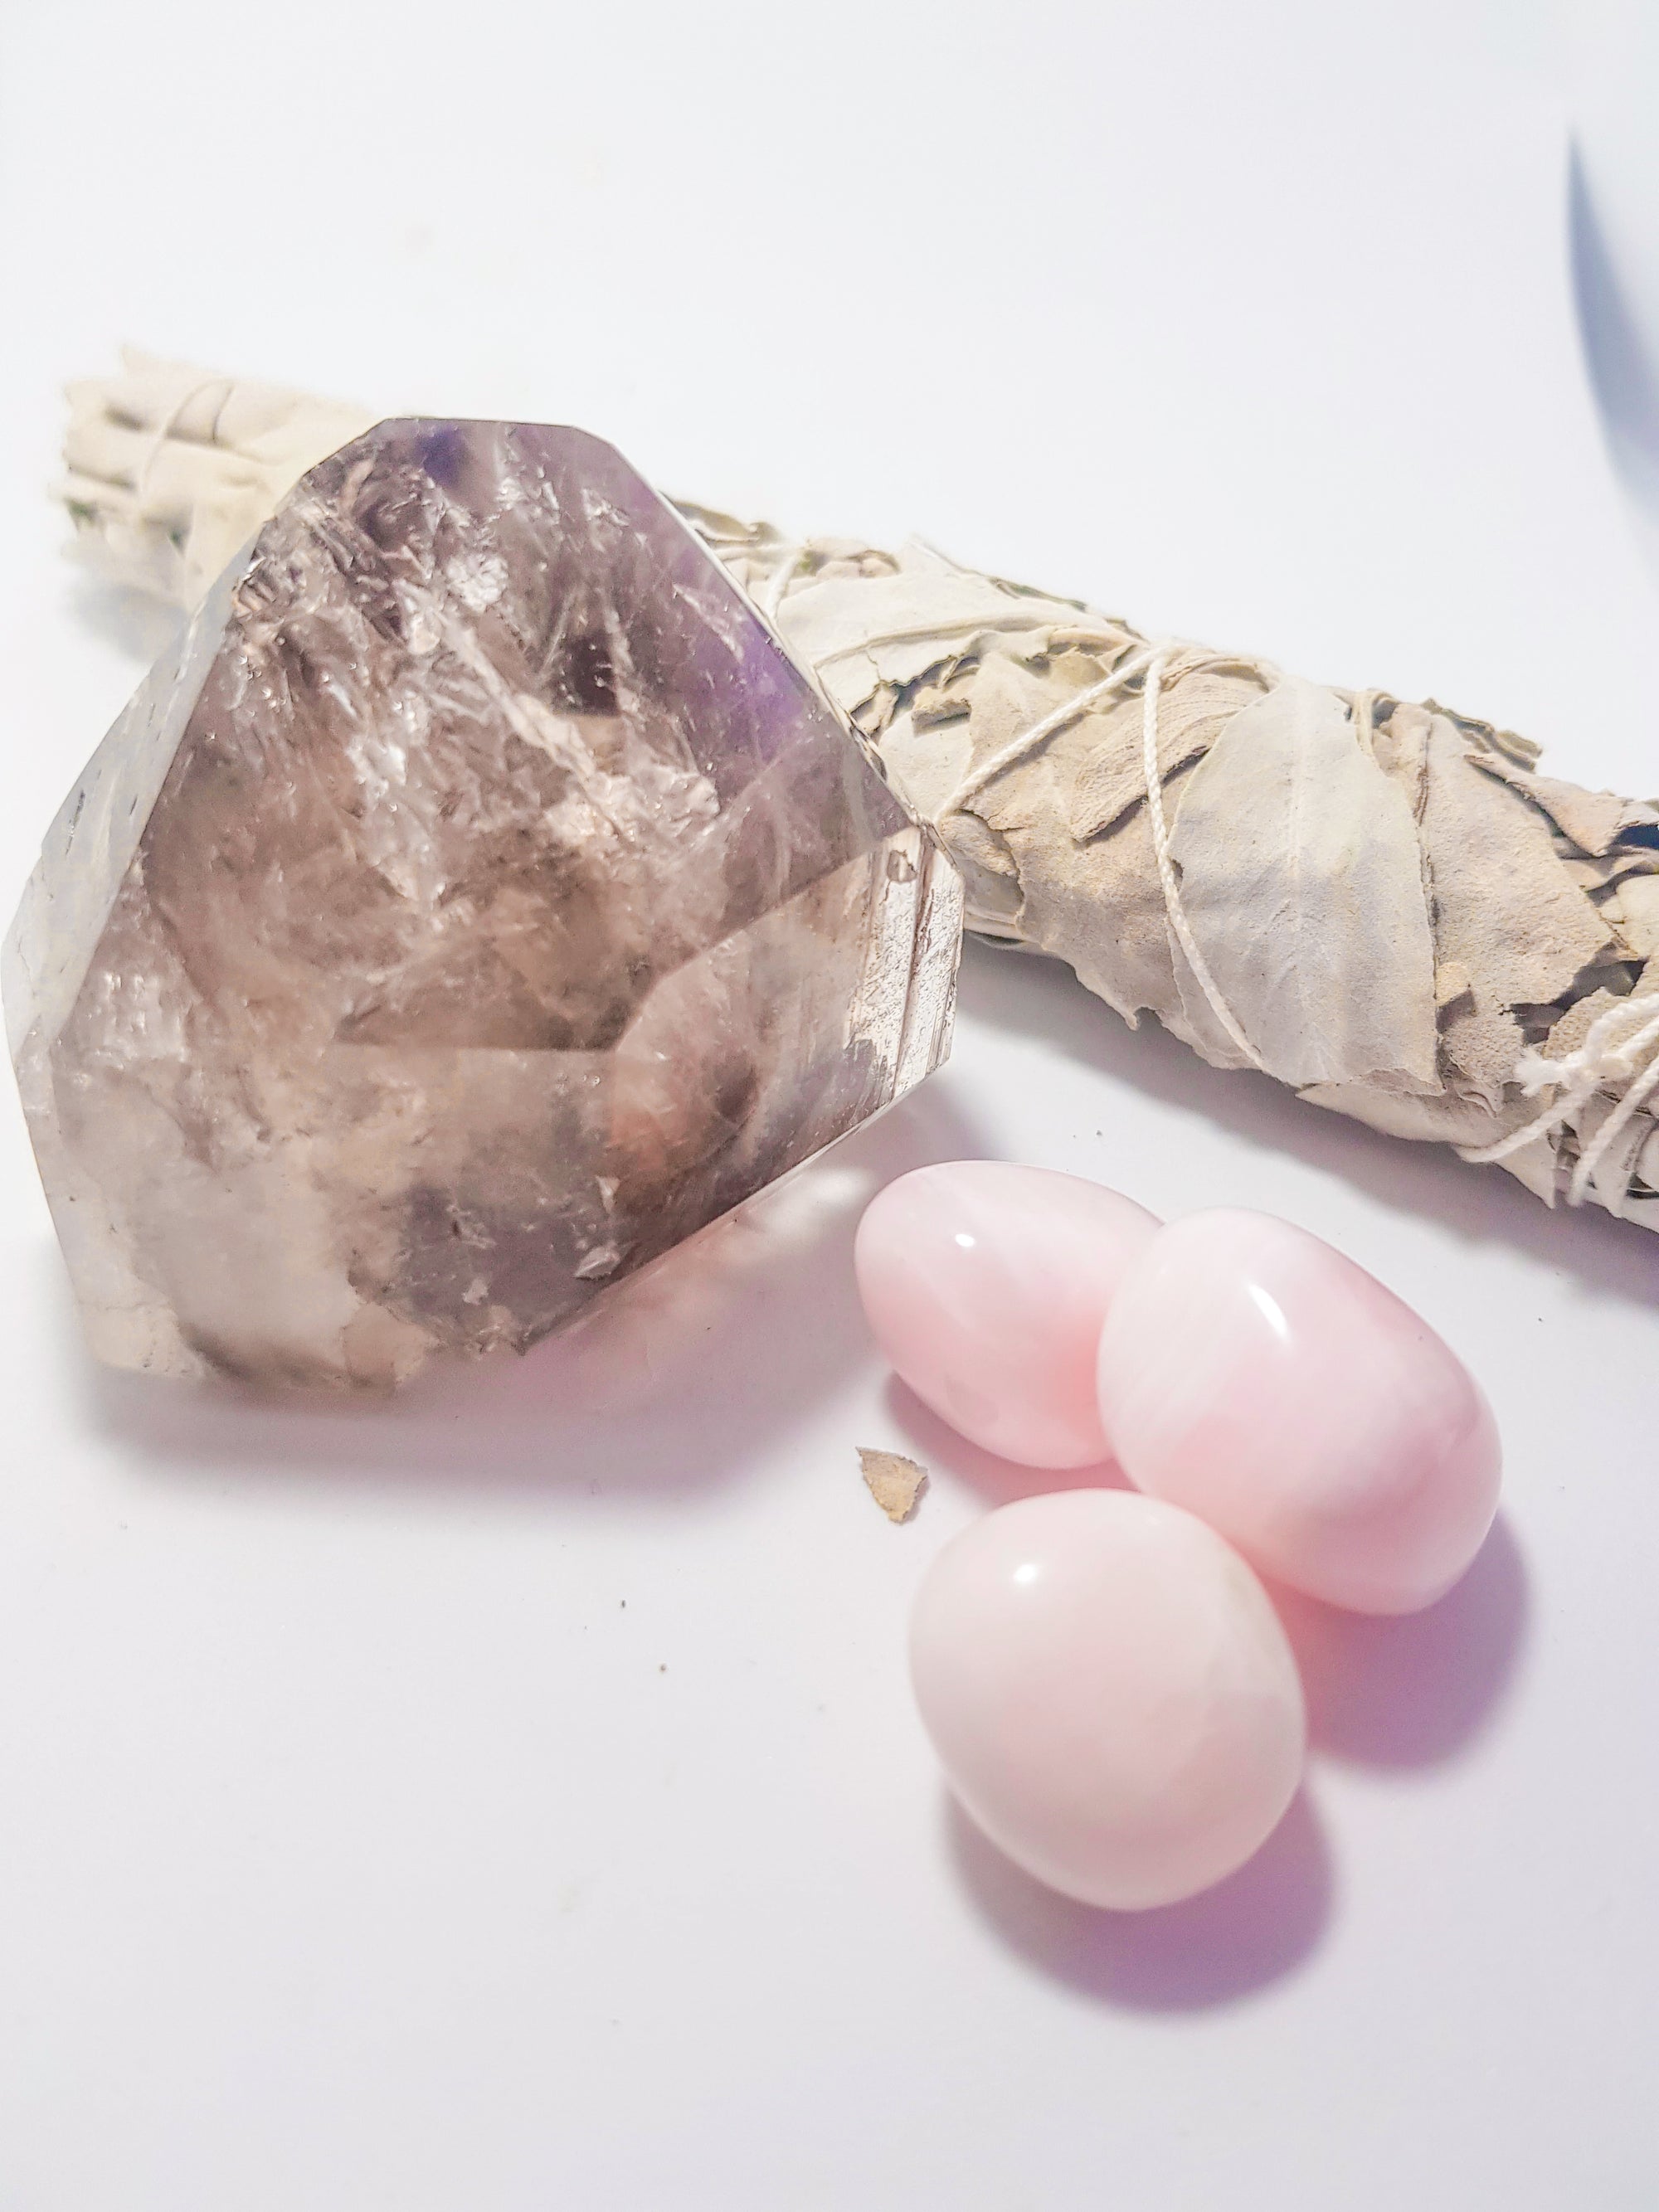 smoky quartz cut point with amethyst inclusion, 3 tumbled pieces of manganoalcite, 1 white sage smudge stick